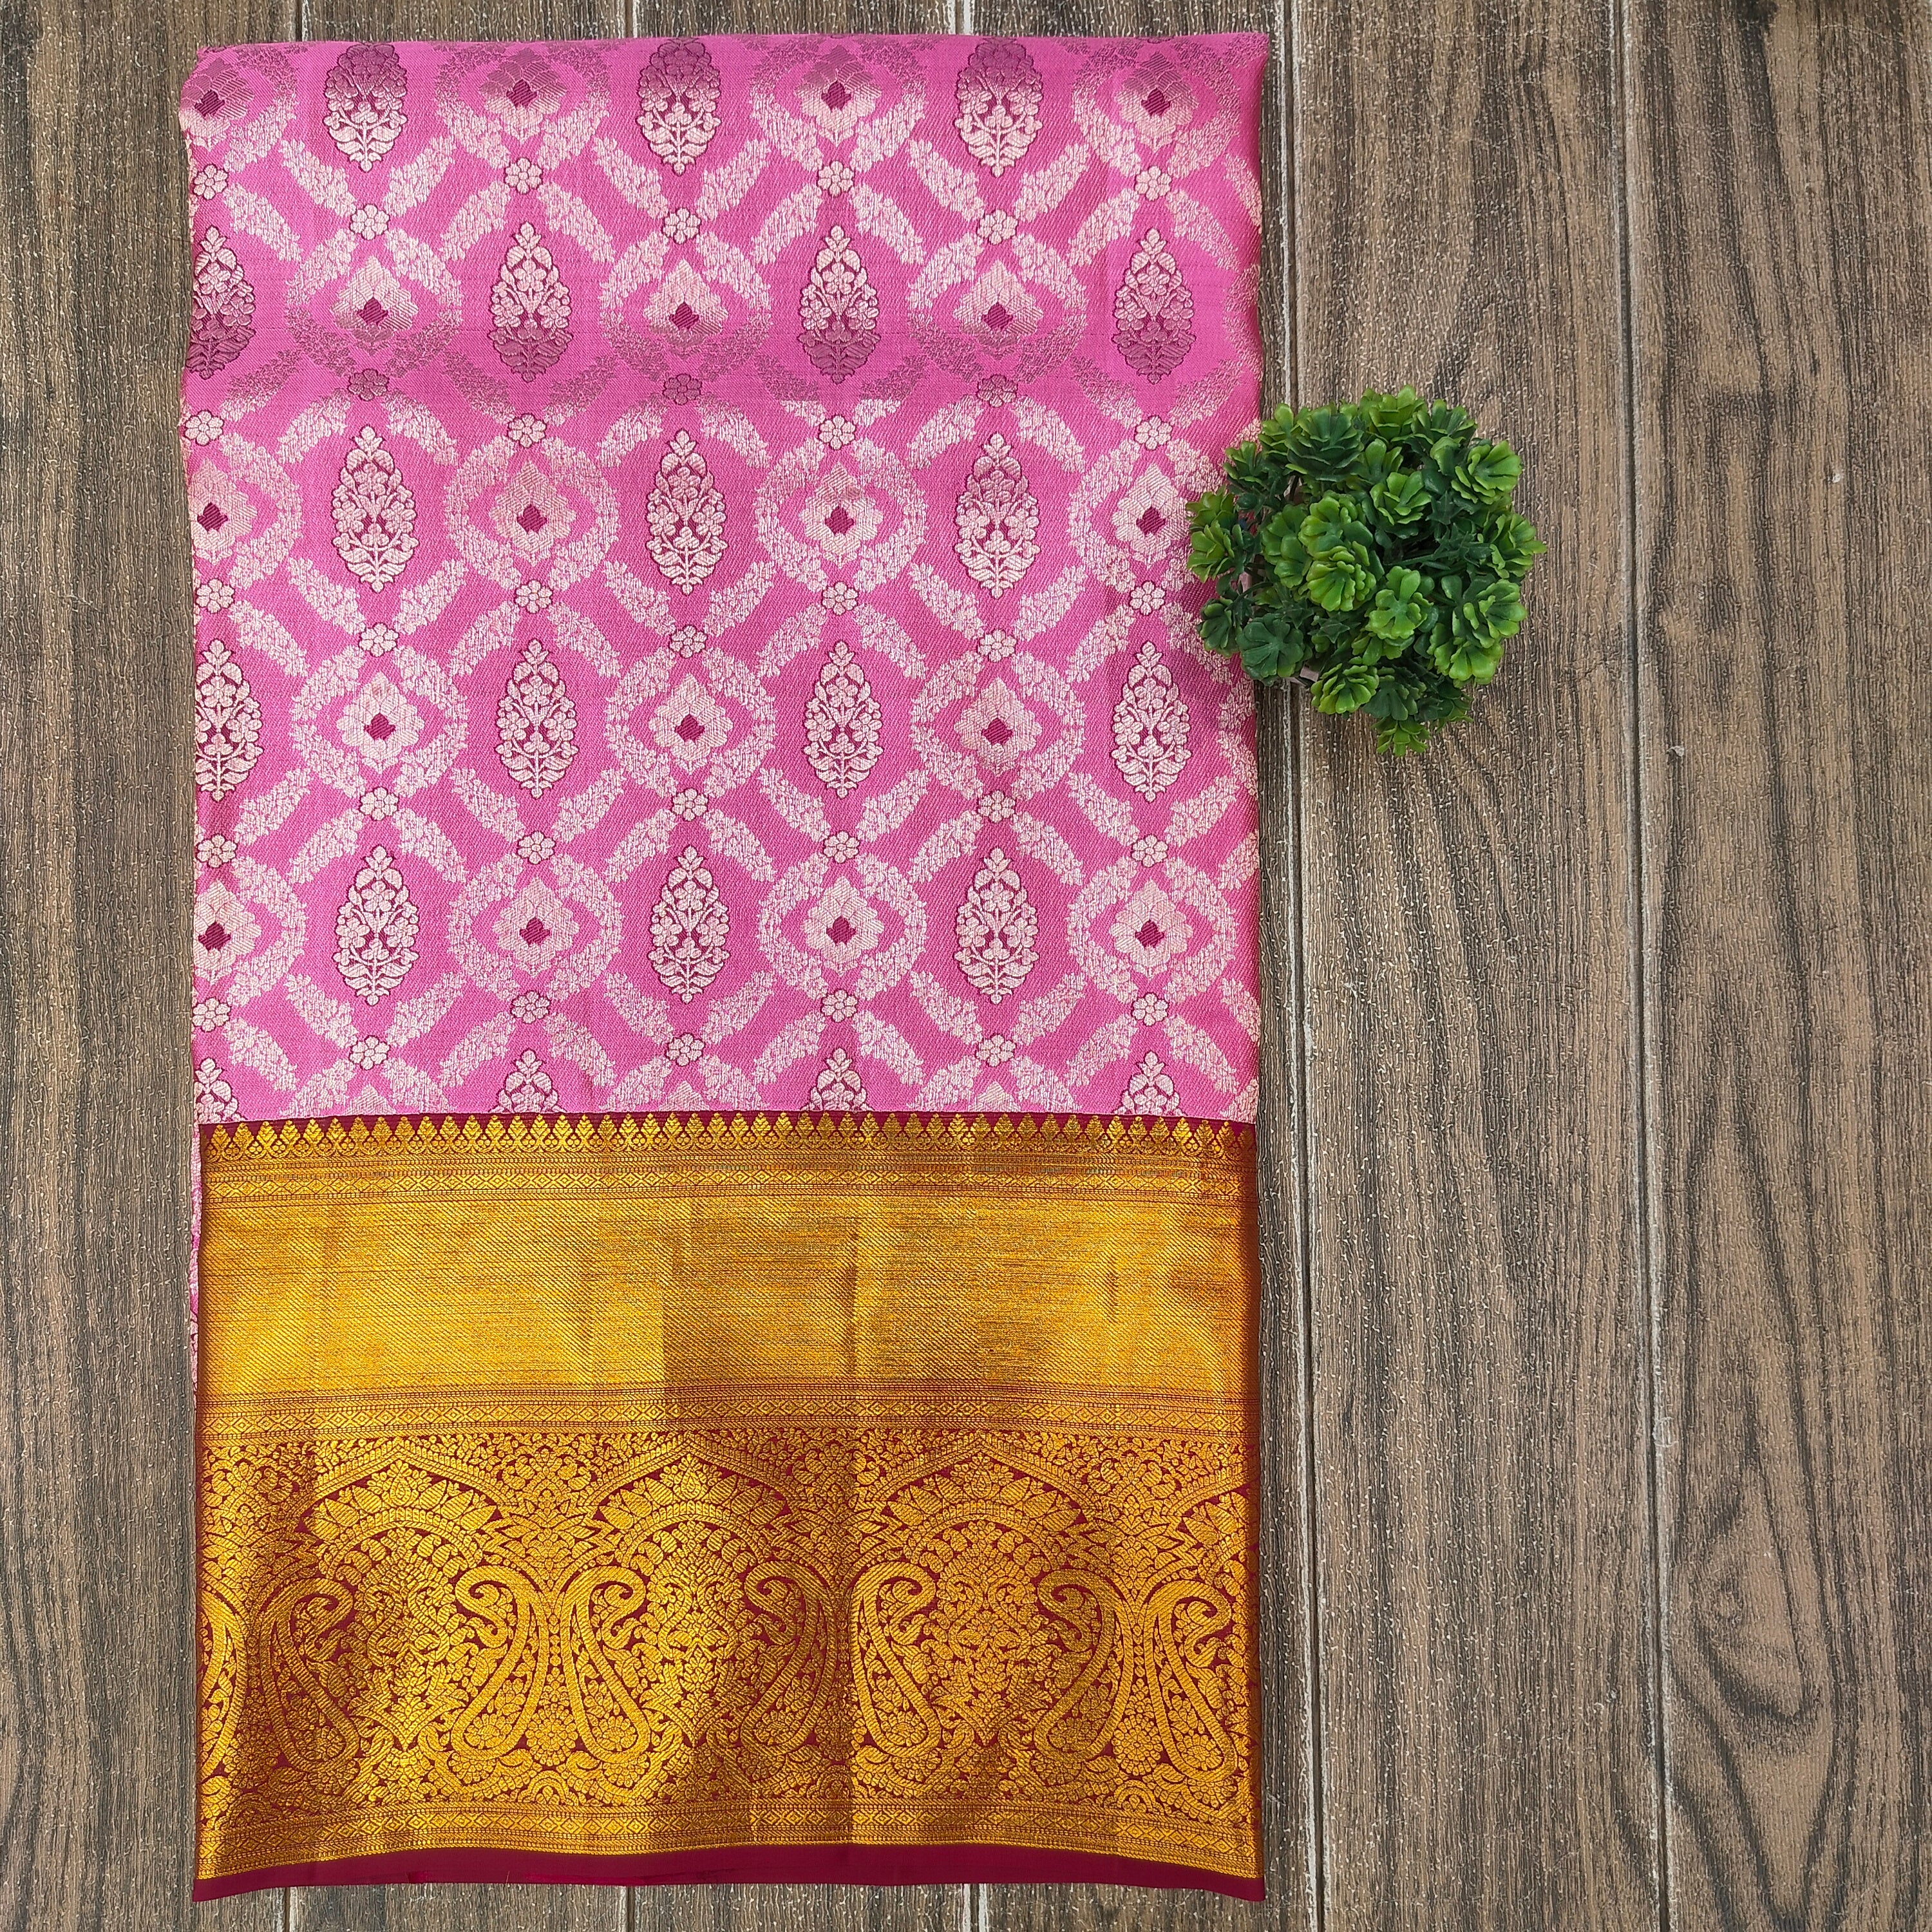 Ambica Wedding Mall - Discover Exquisite Sarees with Free Shipping